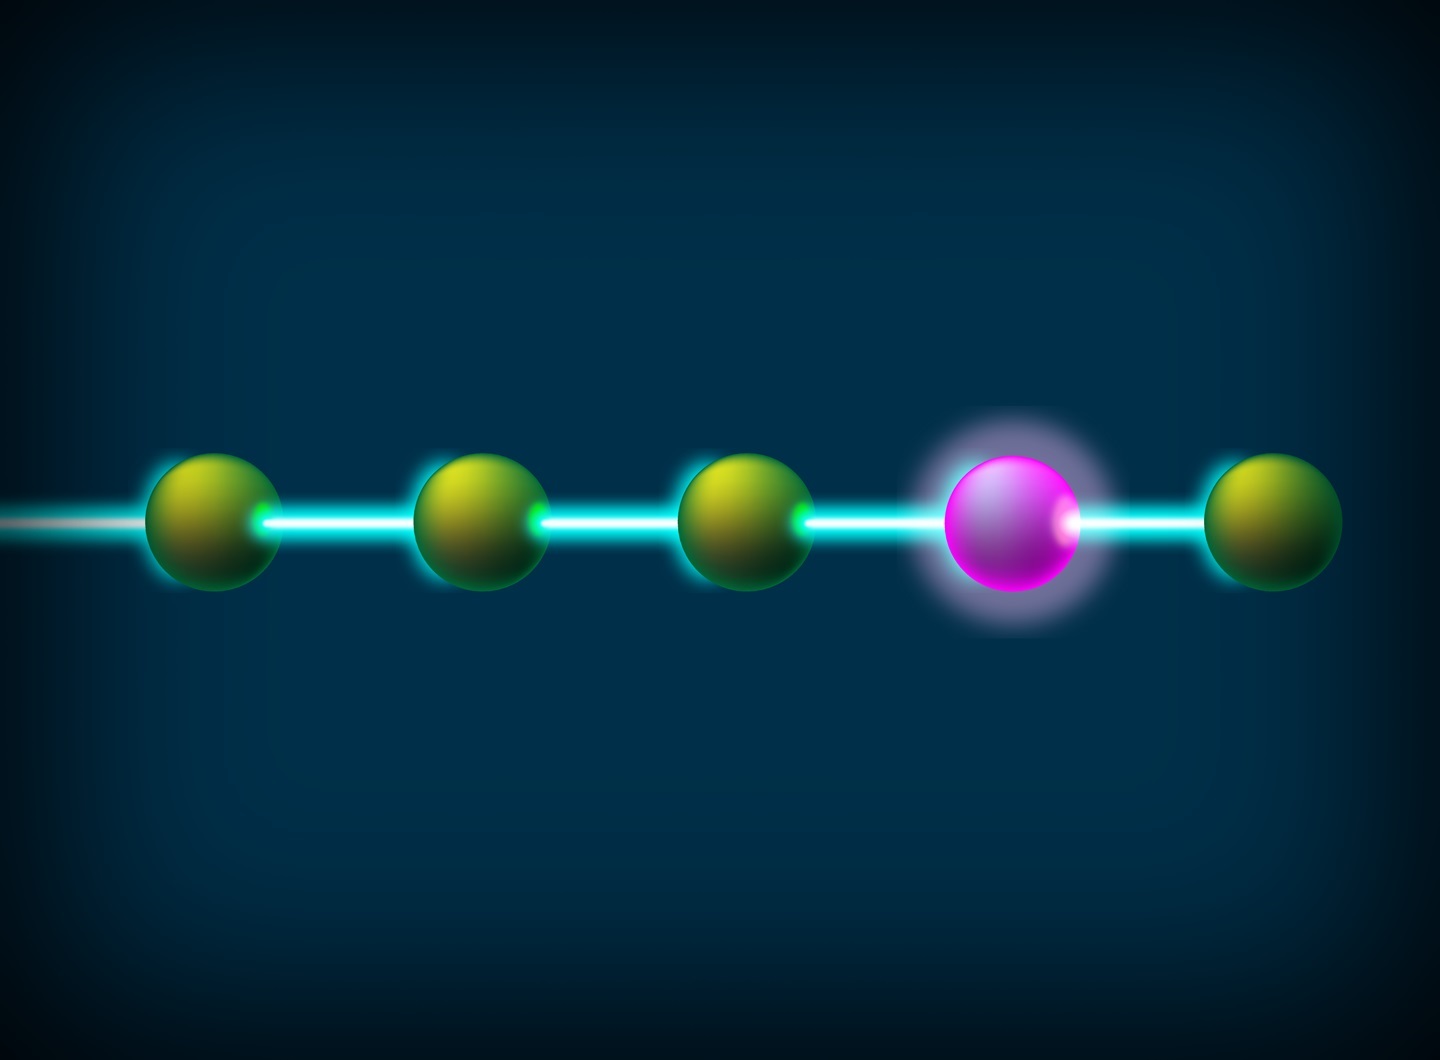 While errors are normally hard to spot in quantum devices, researchers have shown that, with careful control, some errors can cause atoms to glow.